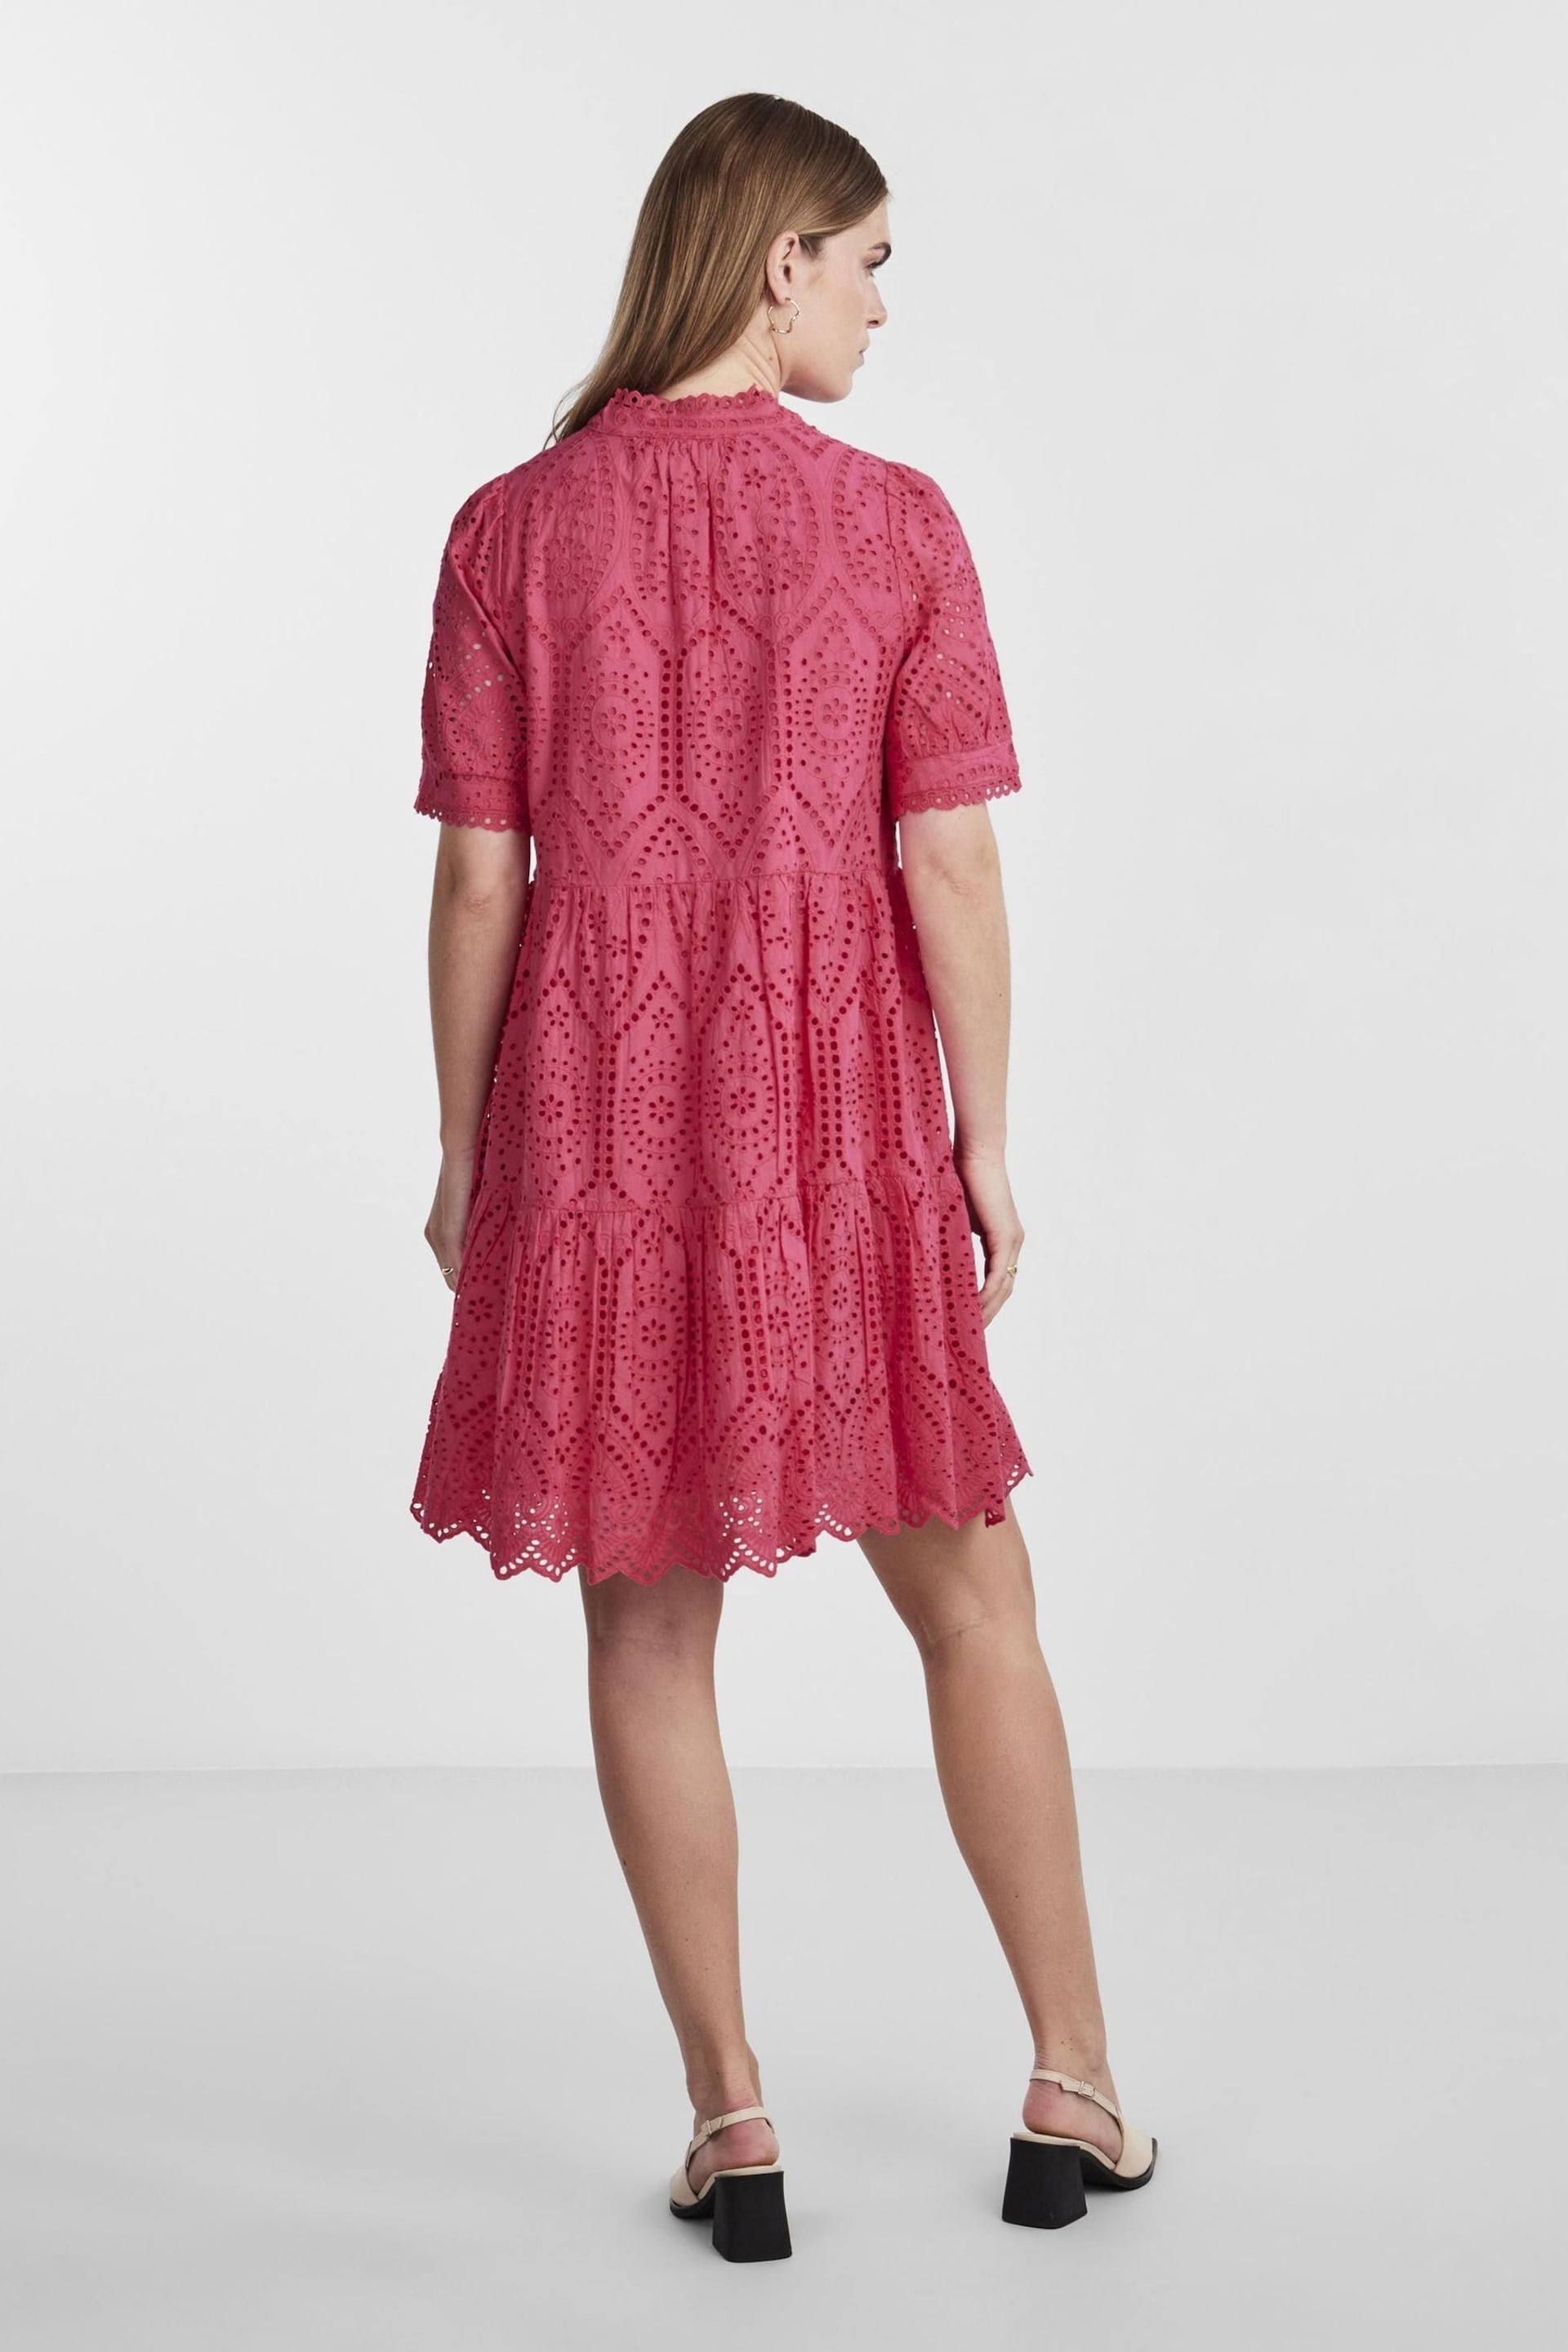 Y.A.S Pink Broderie Long Sleeve Tiered Dress - Image 2 of 3